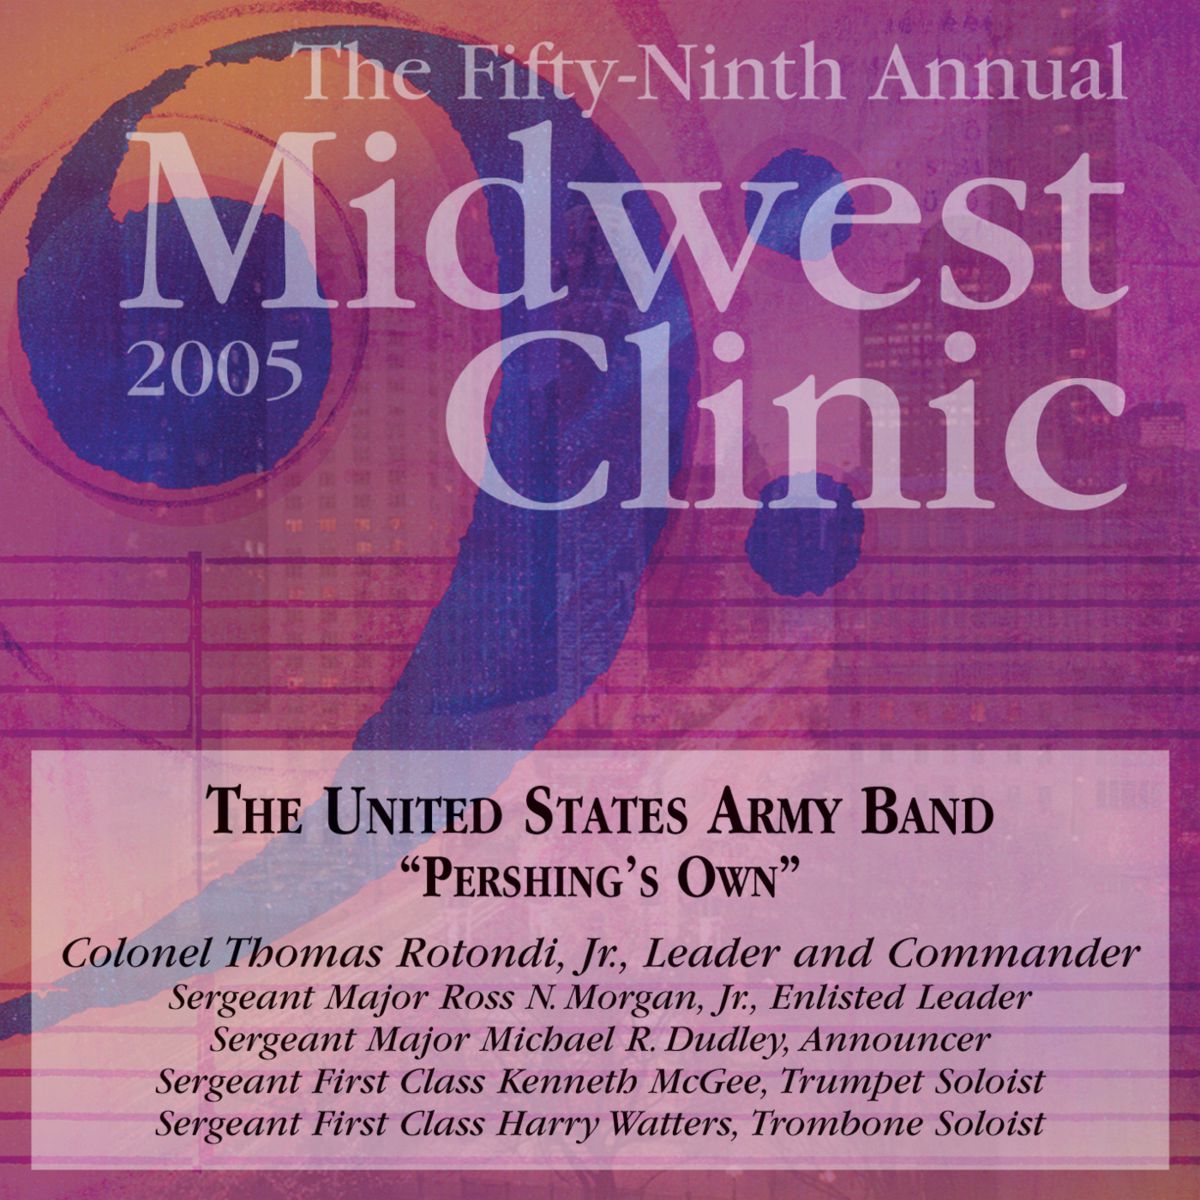 2005 Midwest Clinic: The United States Army Band "Pershings Own" - hacer clic aqu